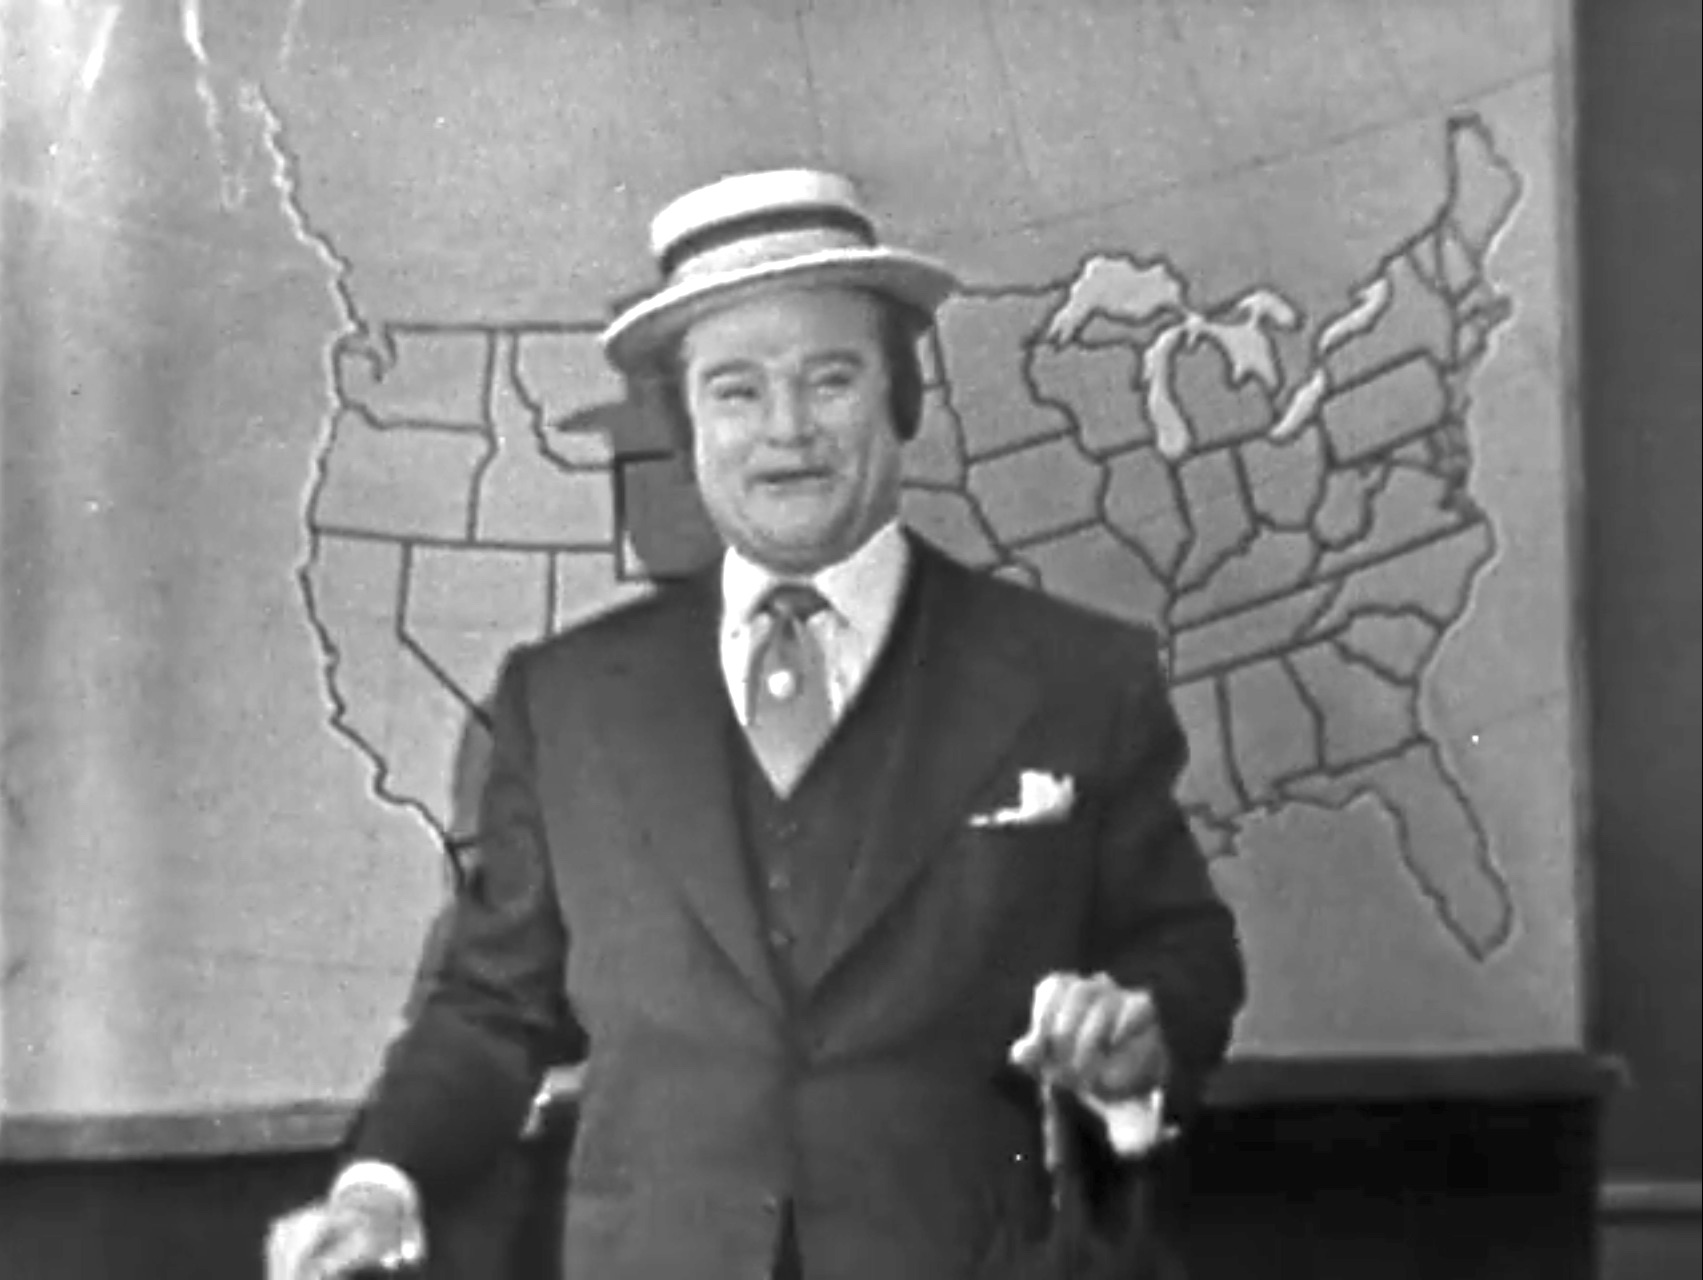 Red Skelton as a weather man in the Mountain Washin' episode of The Red Skelton Show